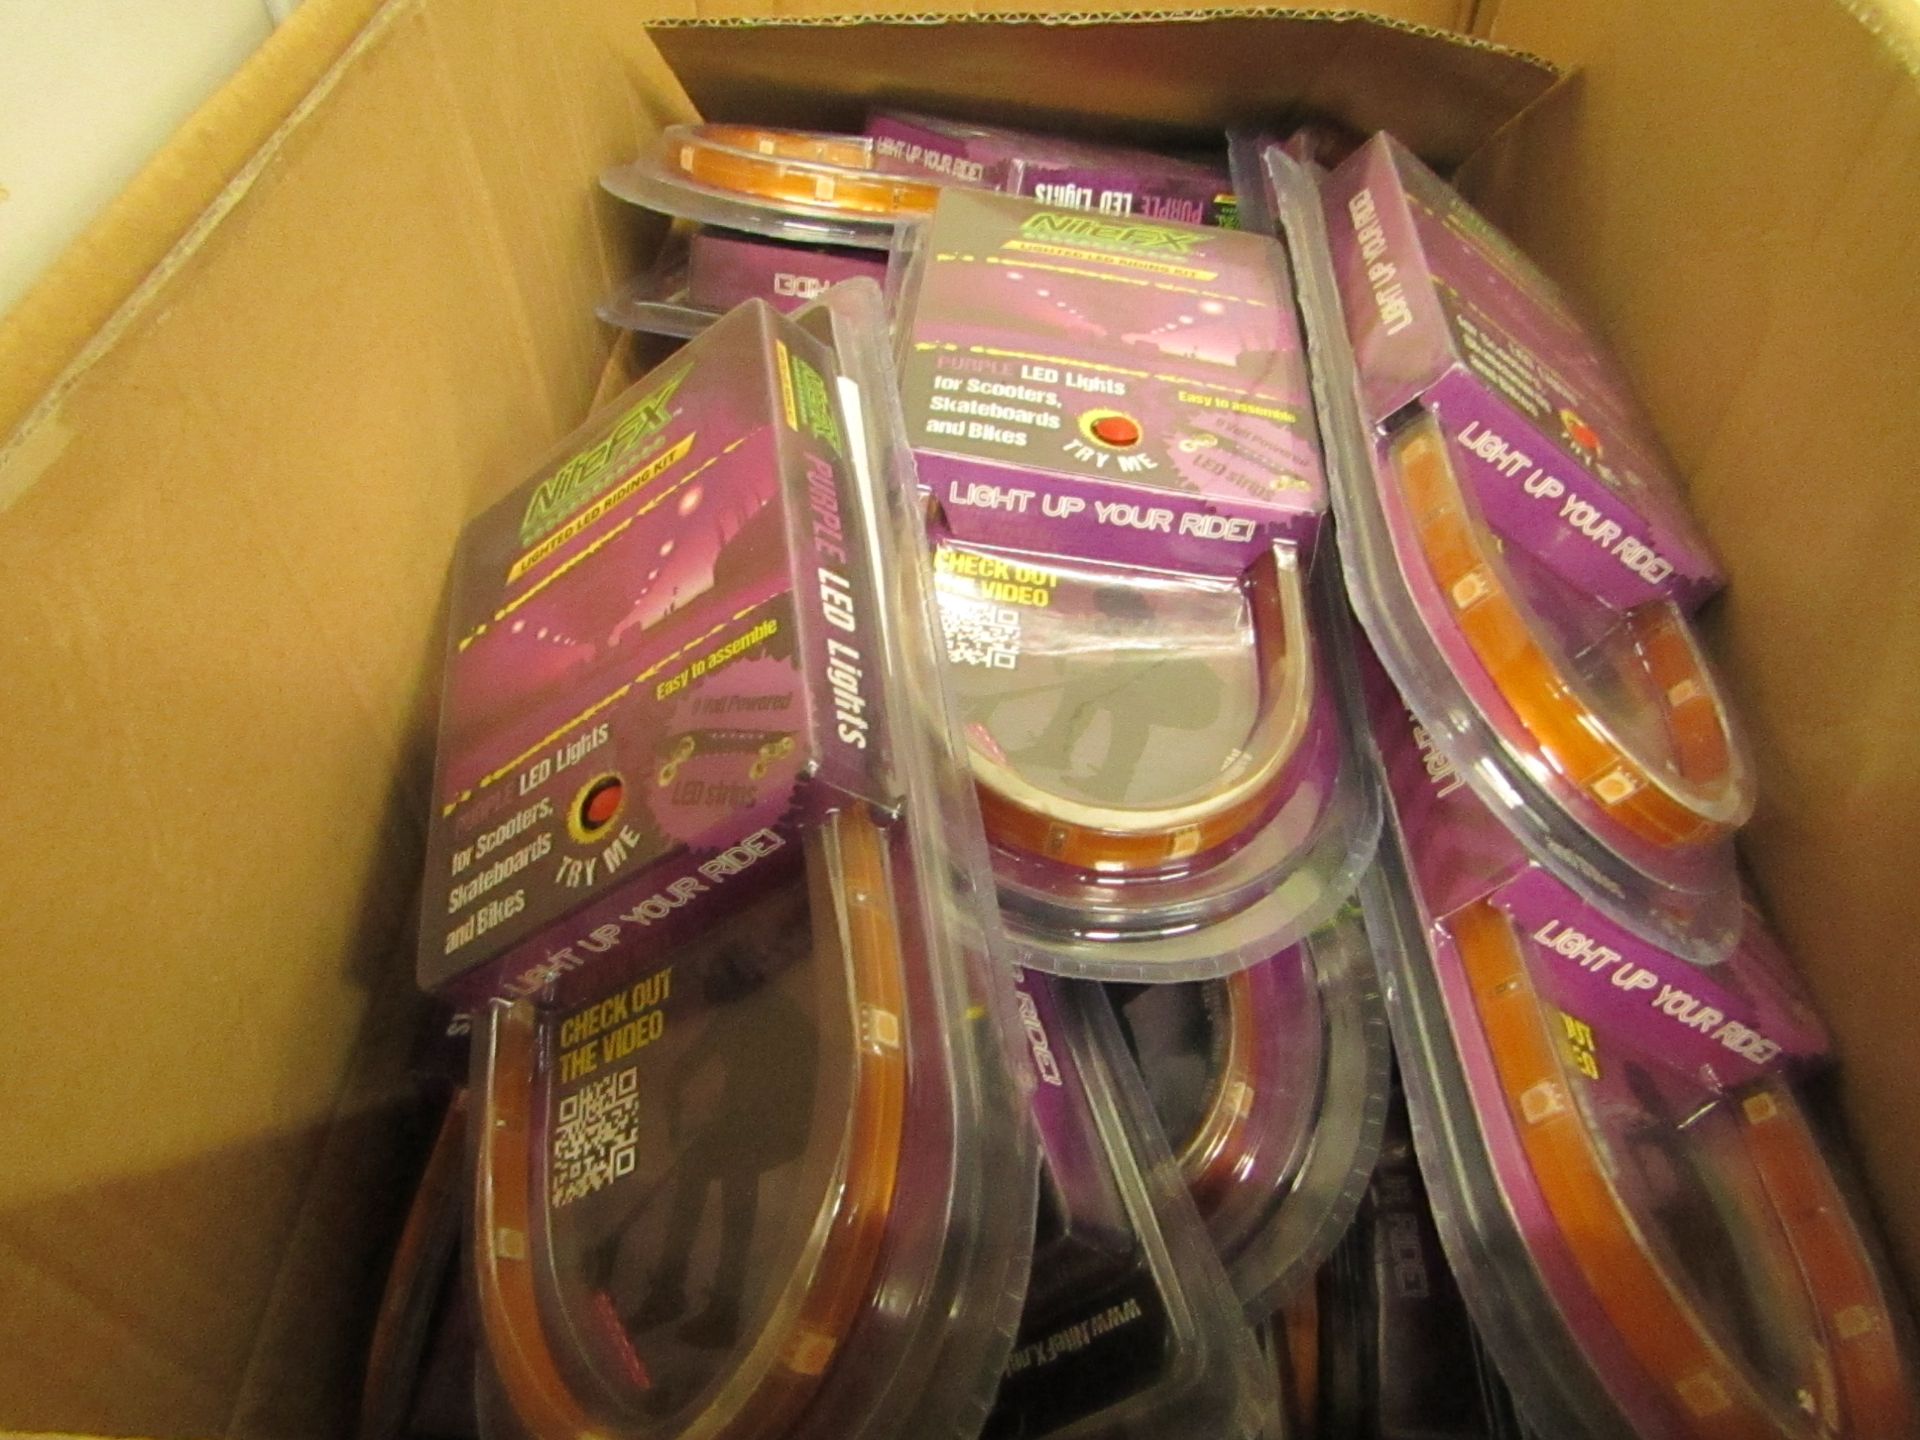 5X NiteFX - Light up LED riding kit (Purple) - Untested, packaged and boxed.